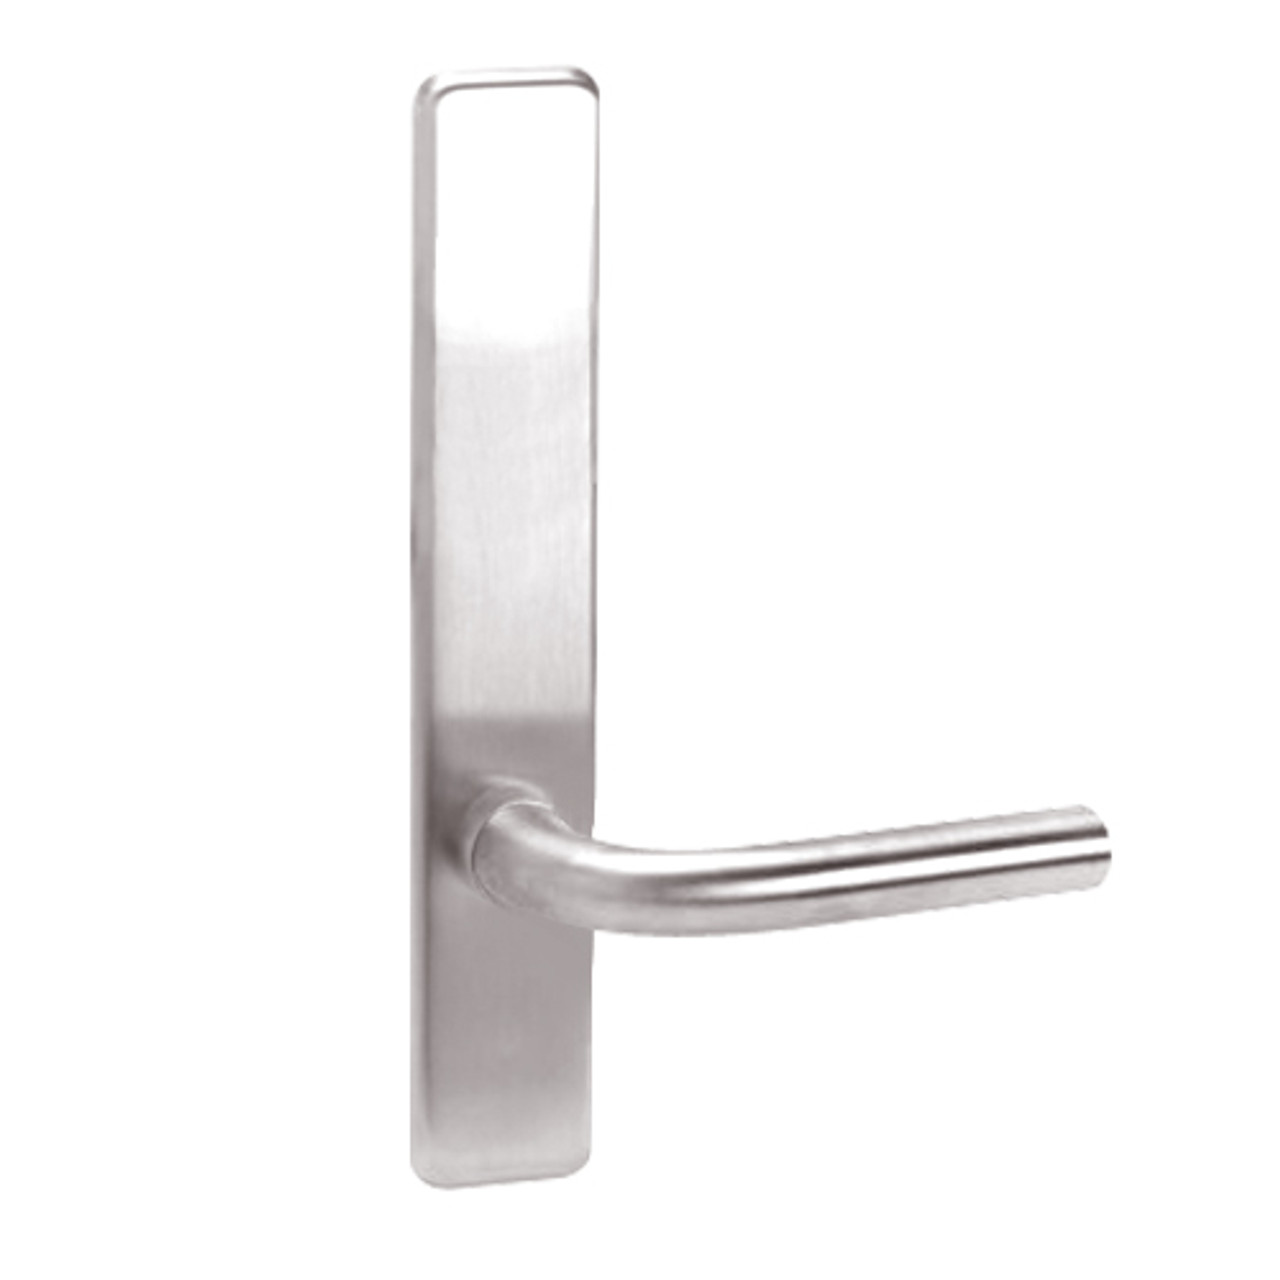 R850-629-RHR Corbin ED4000 Series Exit Device Trim with Dummy Regis Lever in Bright Stainless Steel Finish